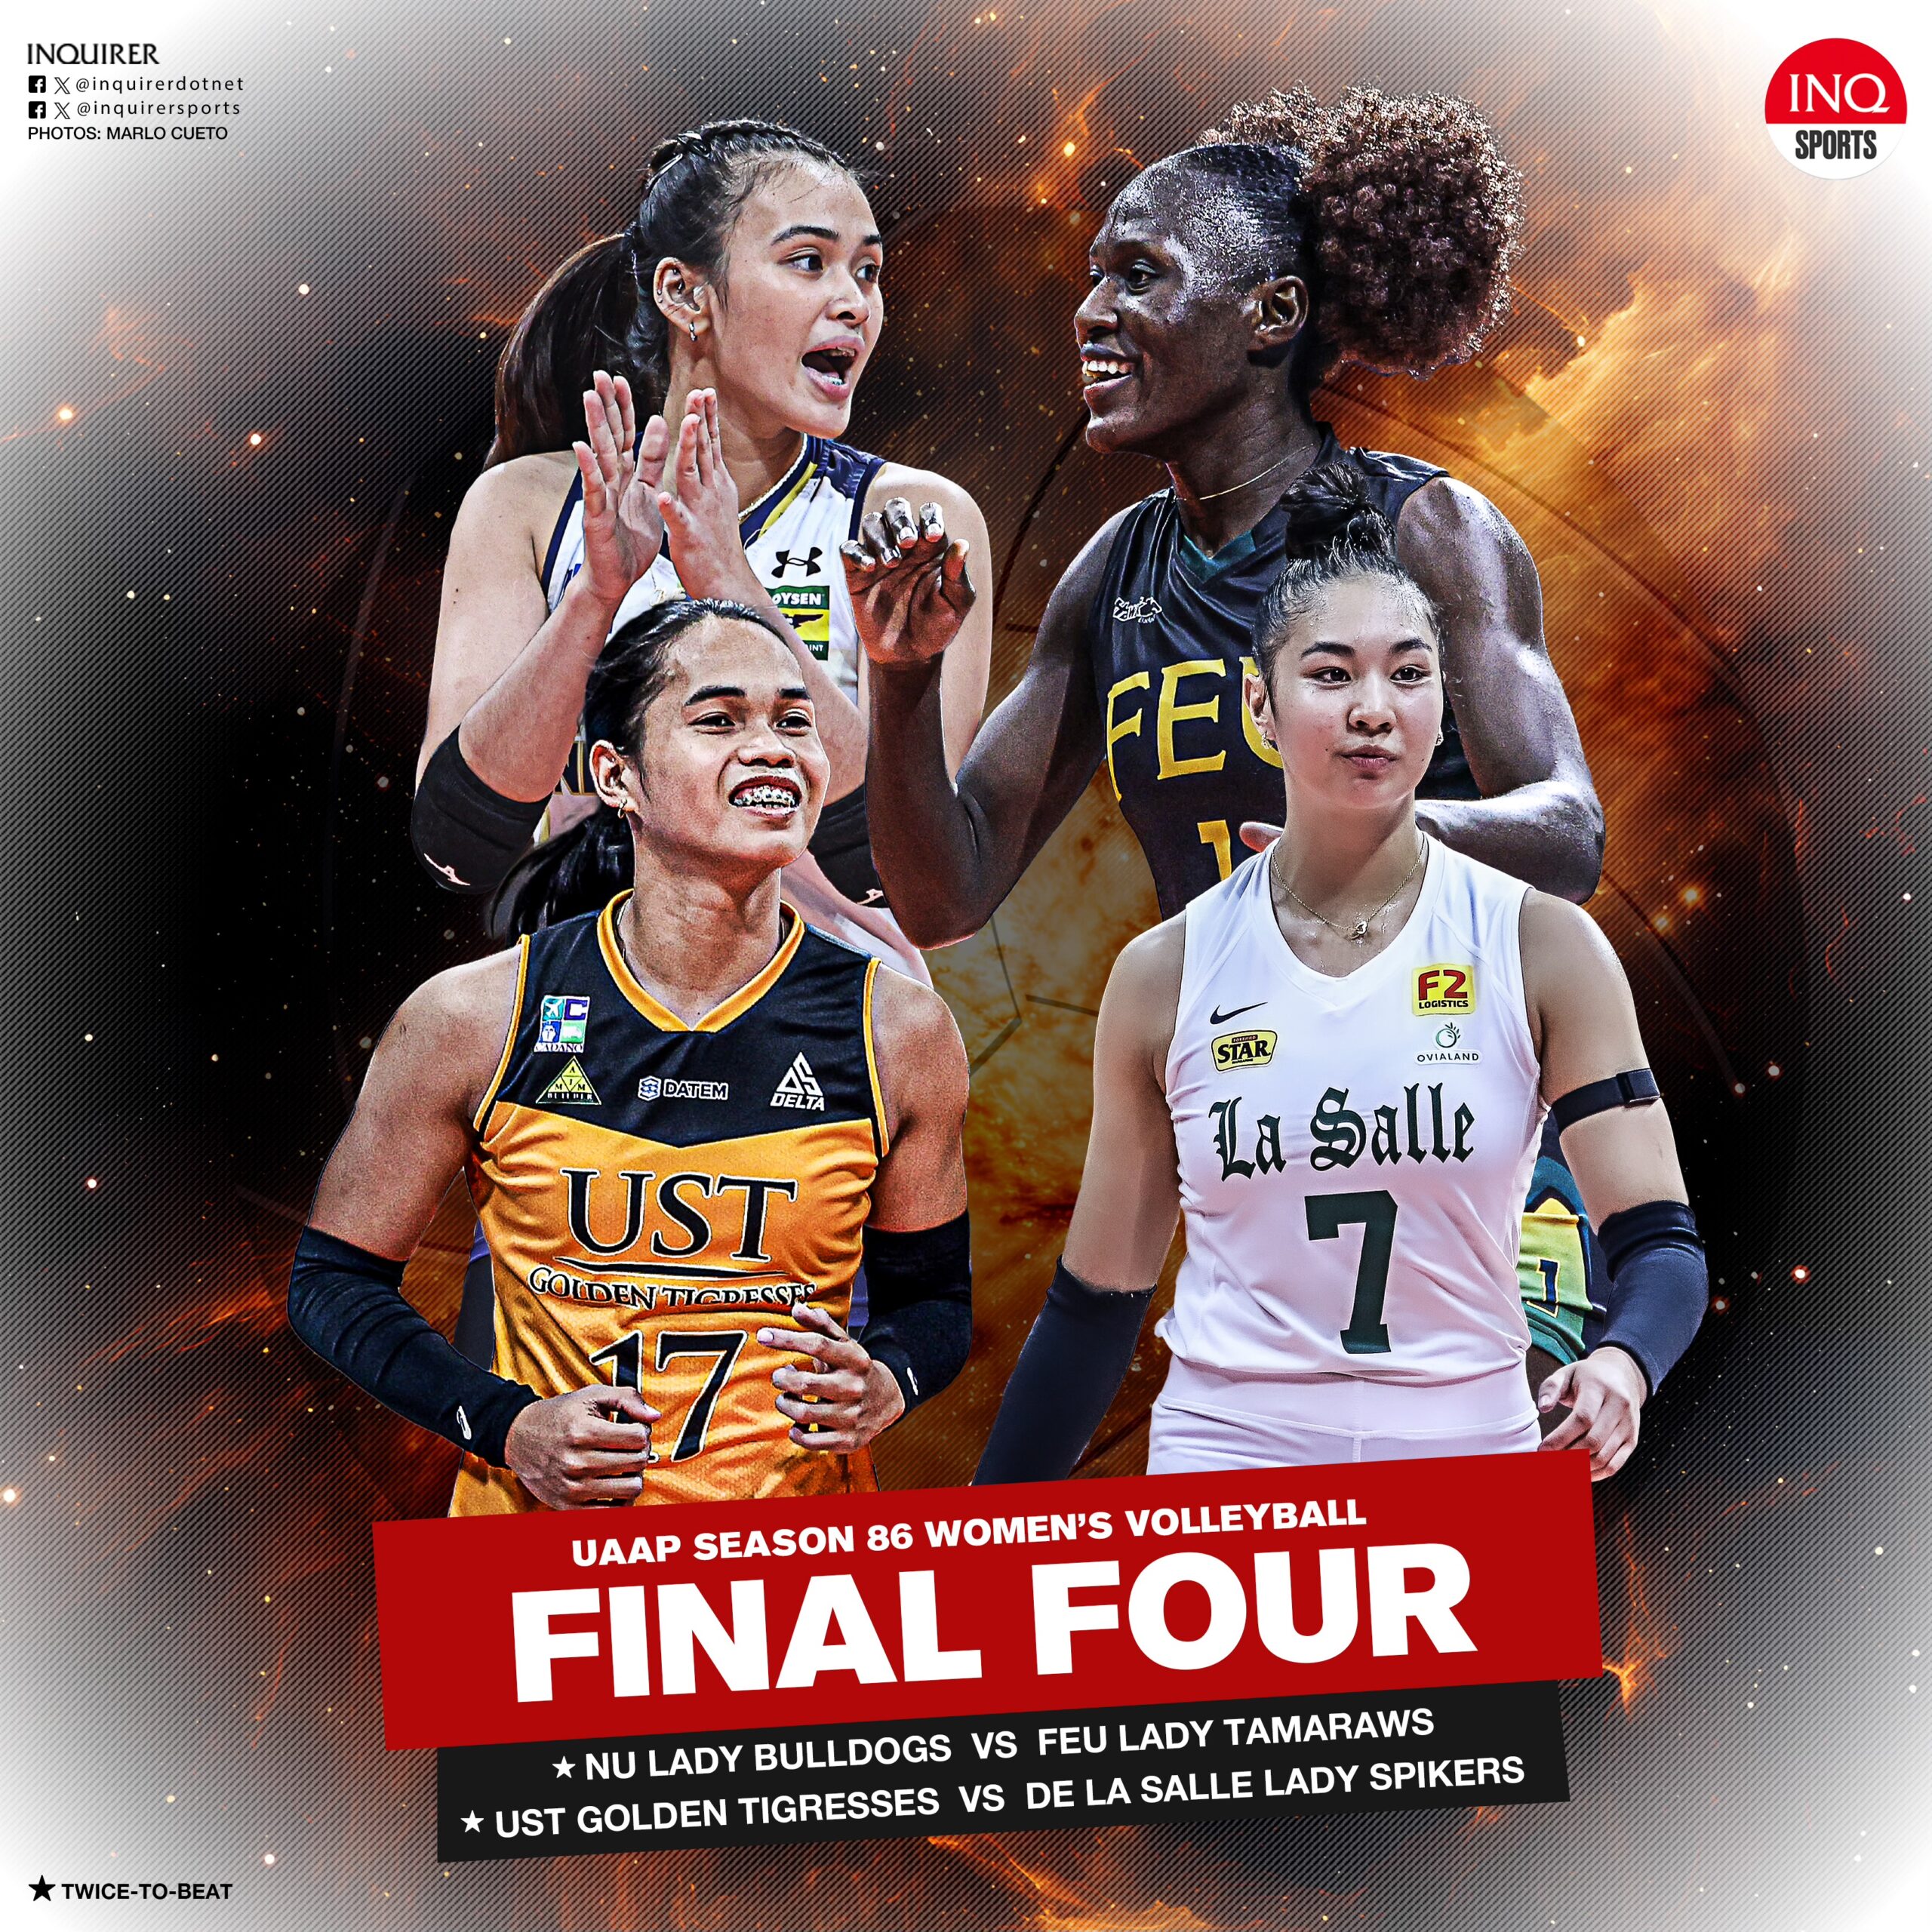 The UAAP Season 86 women's volleyball tournament Final Four cast: NU, UST, La Salle and FEU.